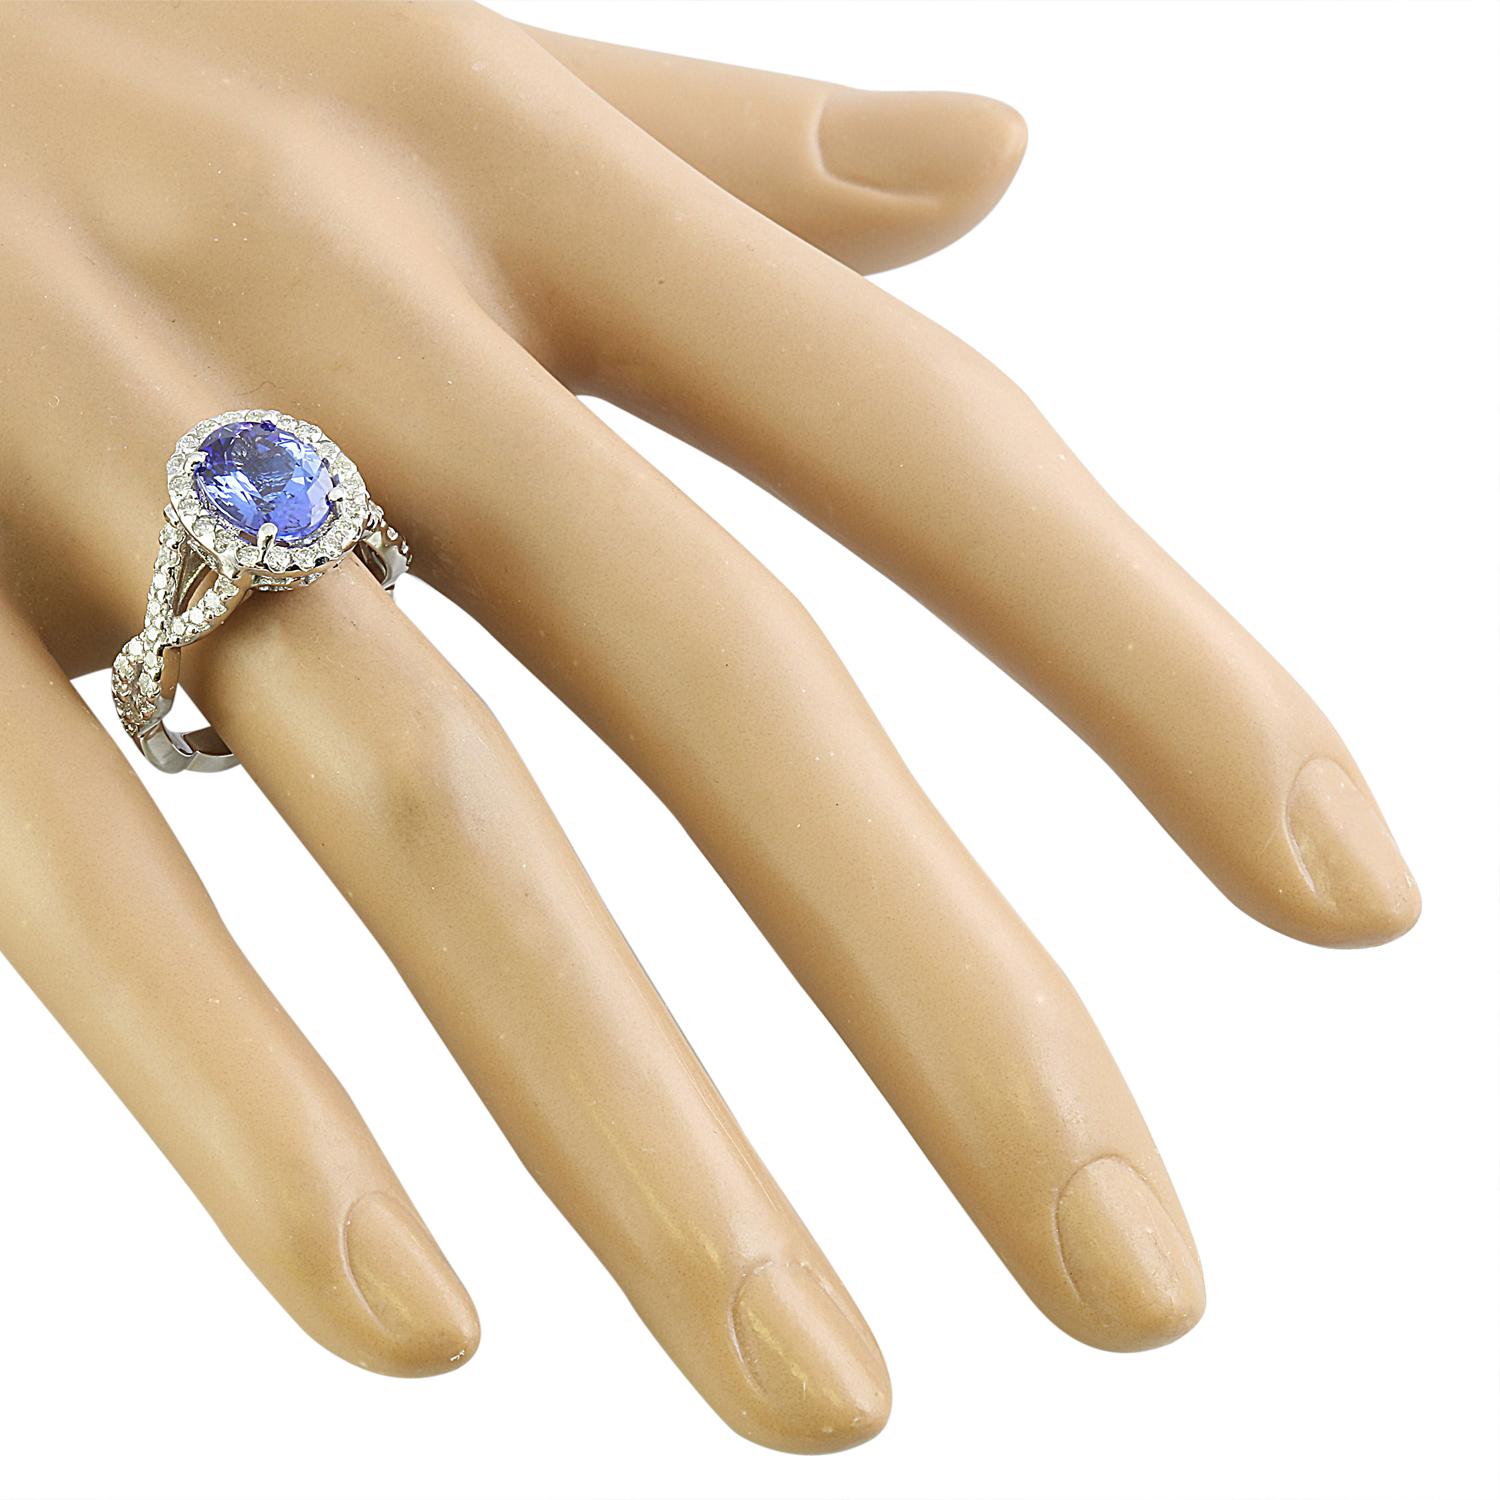 Exquisite Natural Tanzanite Diamond Ring in 14K White Gold In New Condition For Sale In Los Angeles, CA